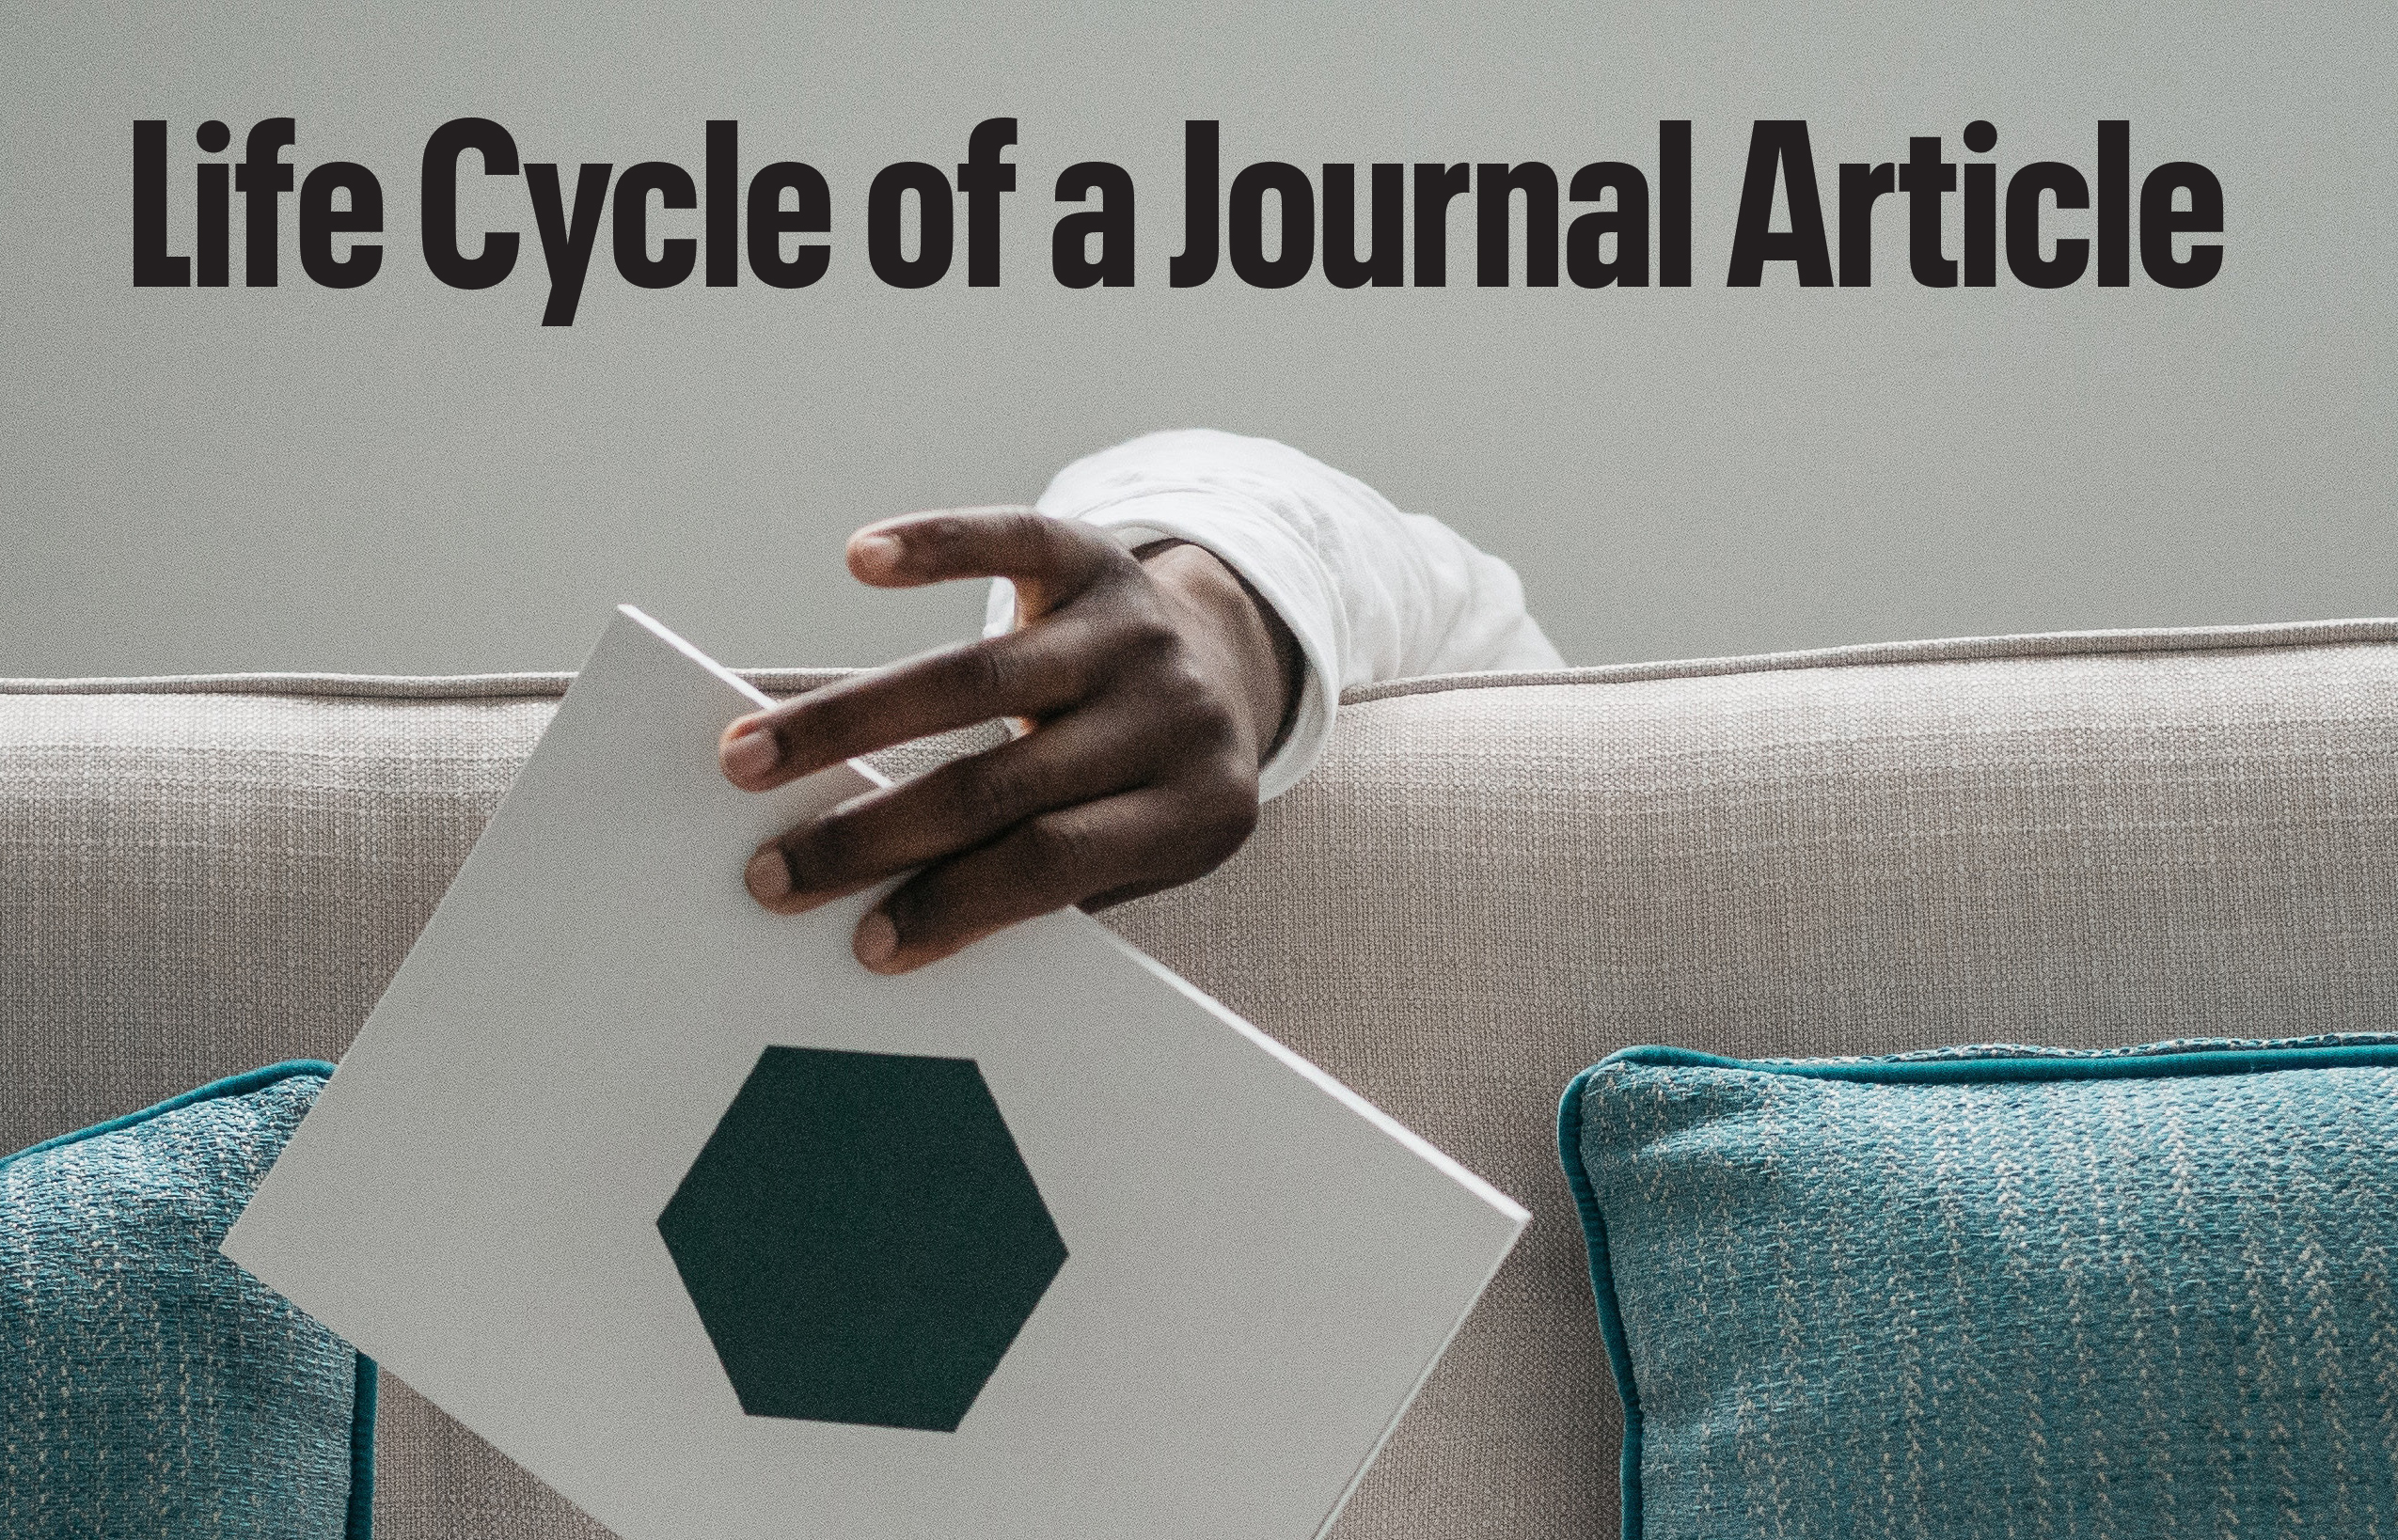 Life cycle of a journal article